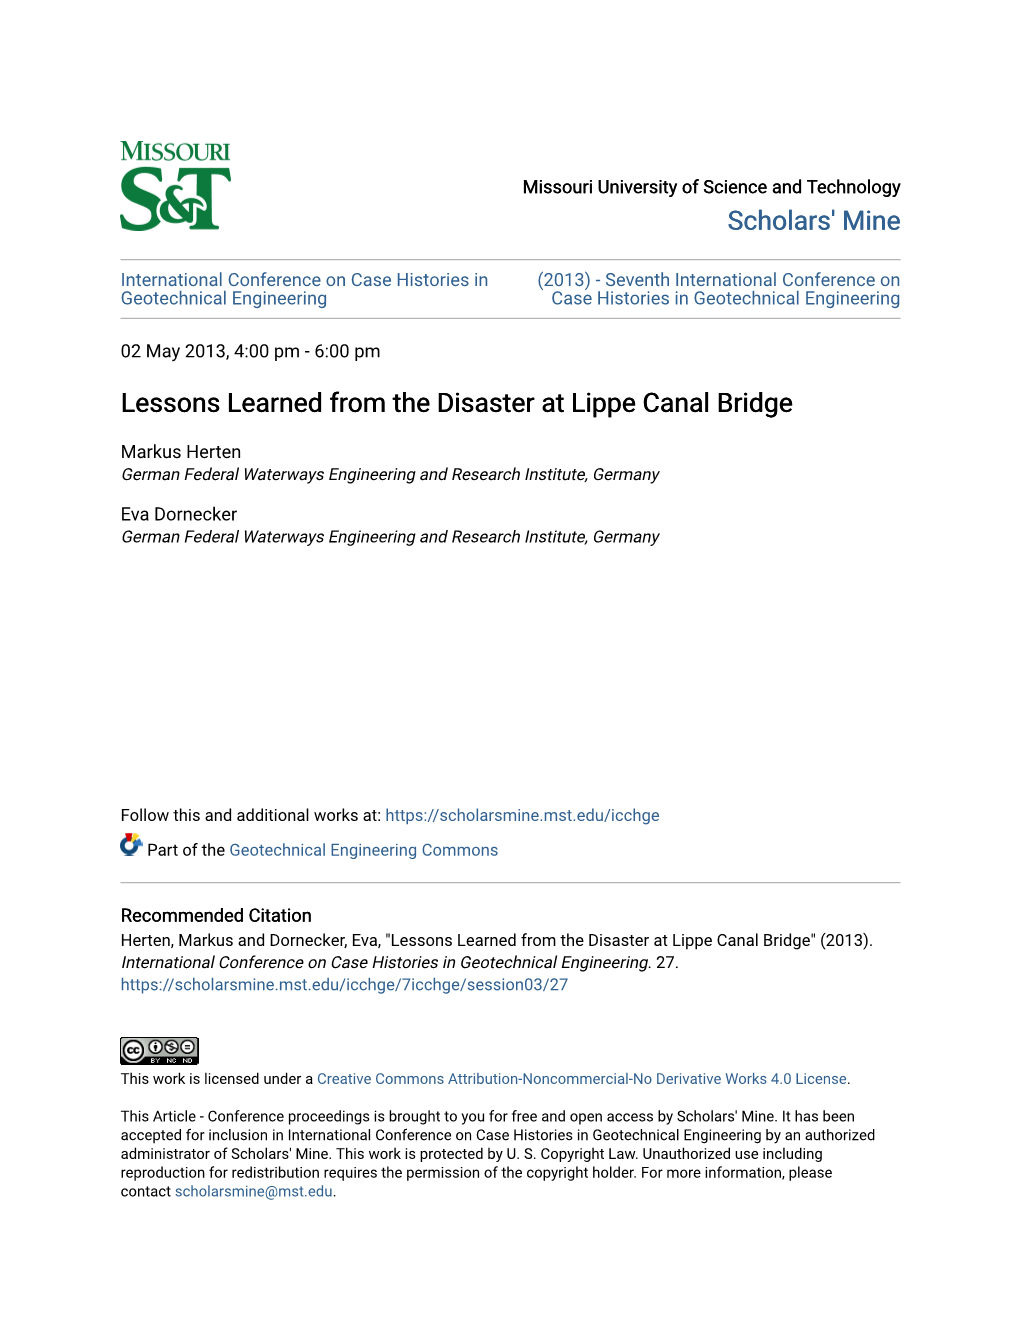 Lessons Learned from the Disaster at Lippe Canal Bridge